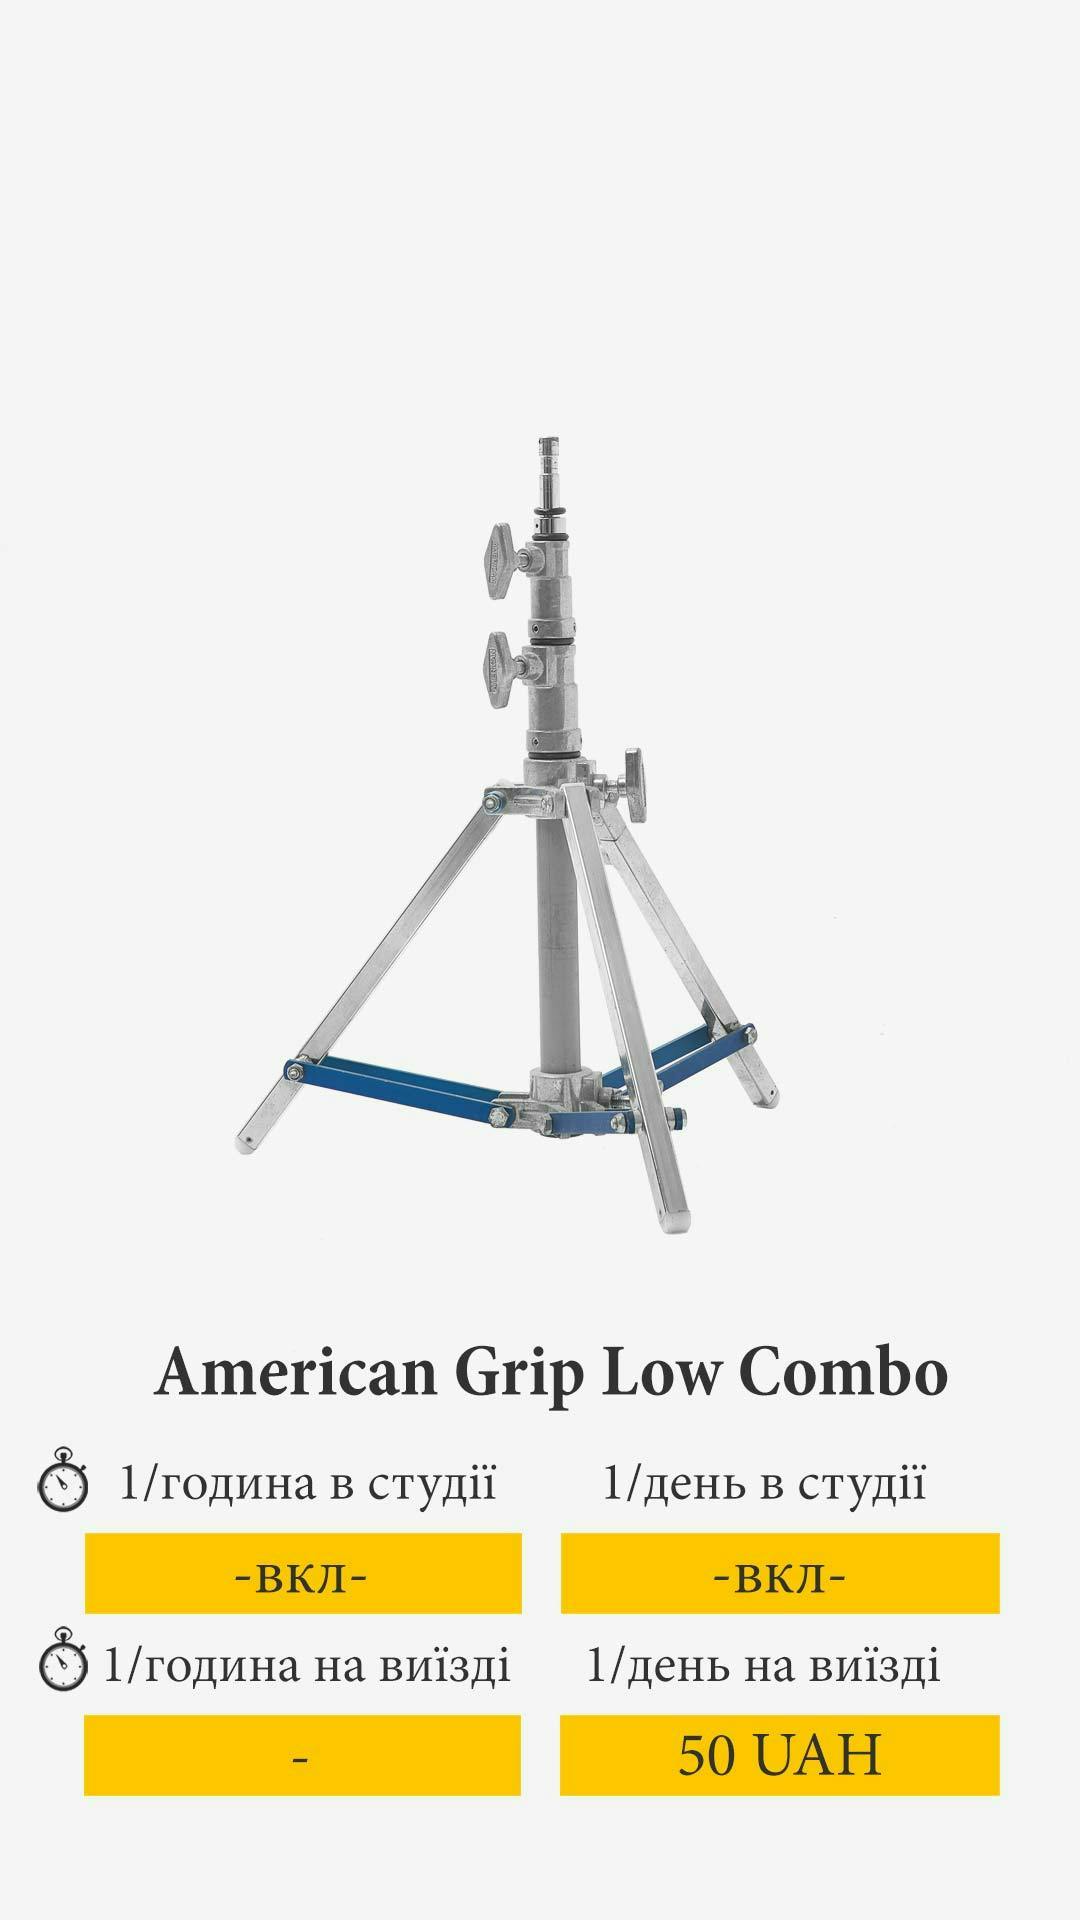 Cover image from american-grip-low-combo